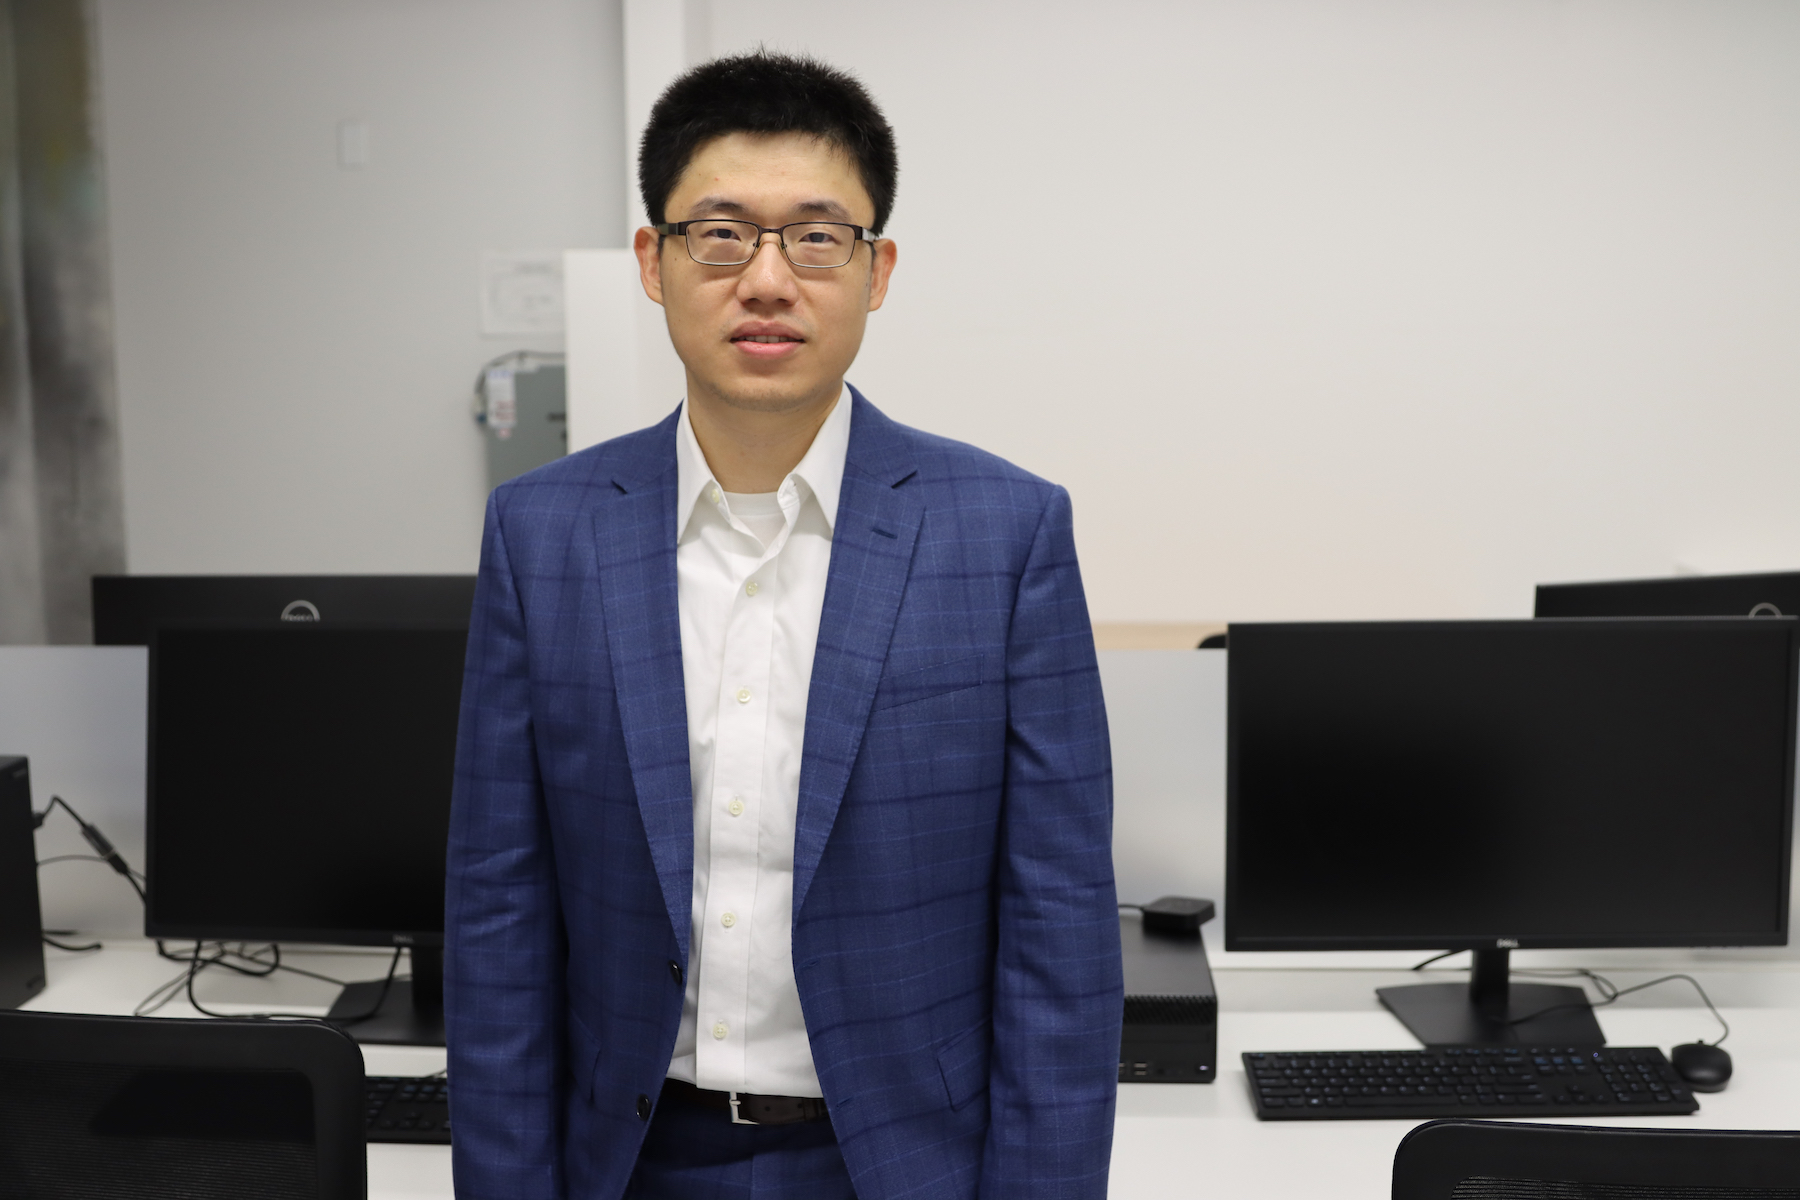 Assistant Professor Huang in his computer laboratory